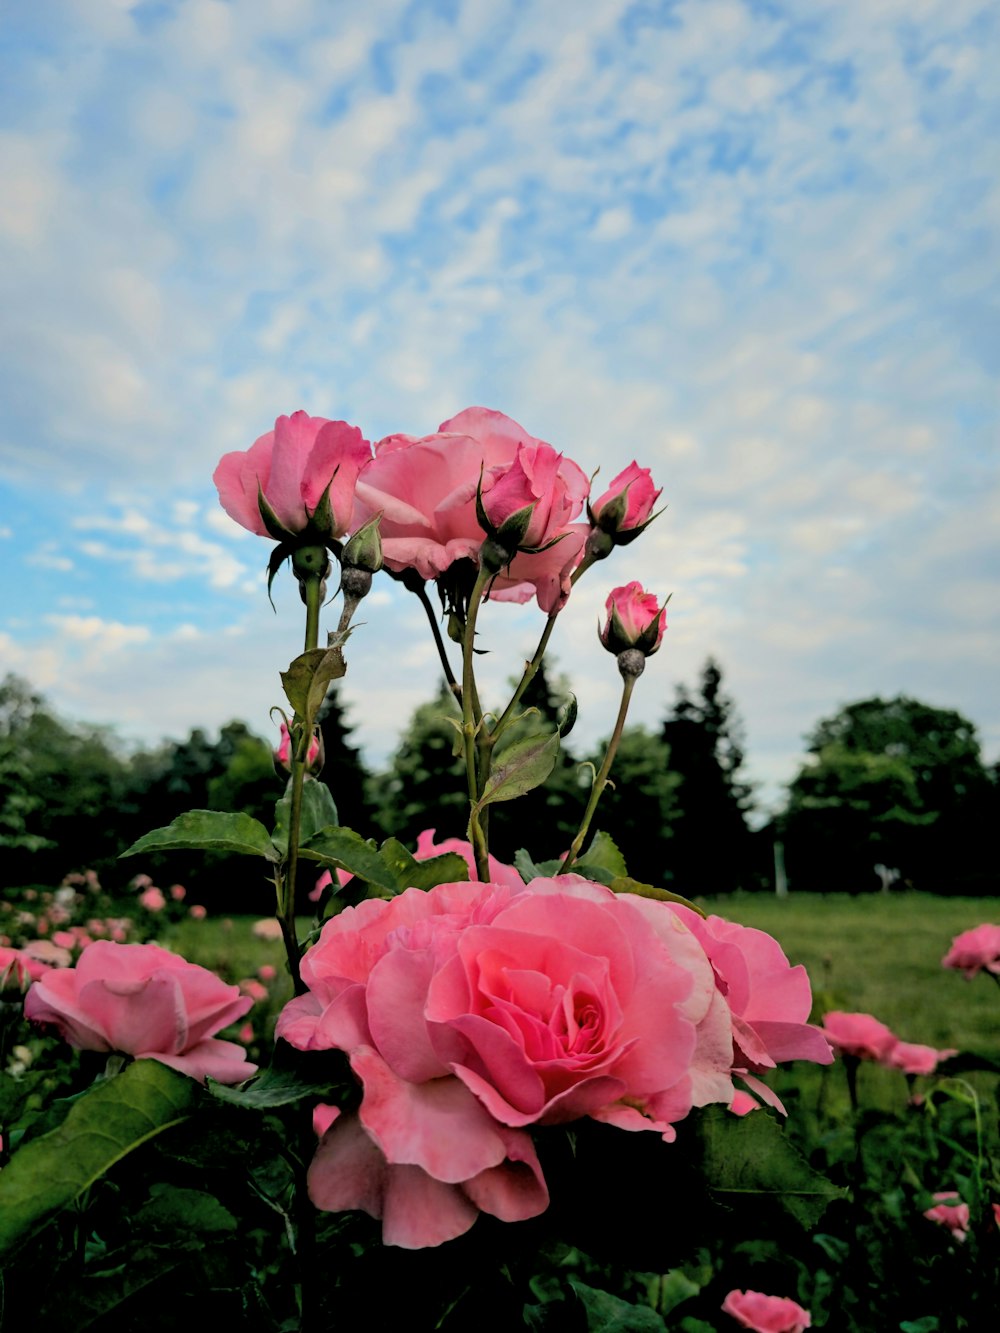 a field full of pink roses under a cloudy blue sky